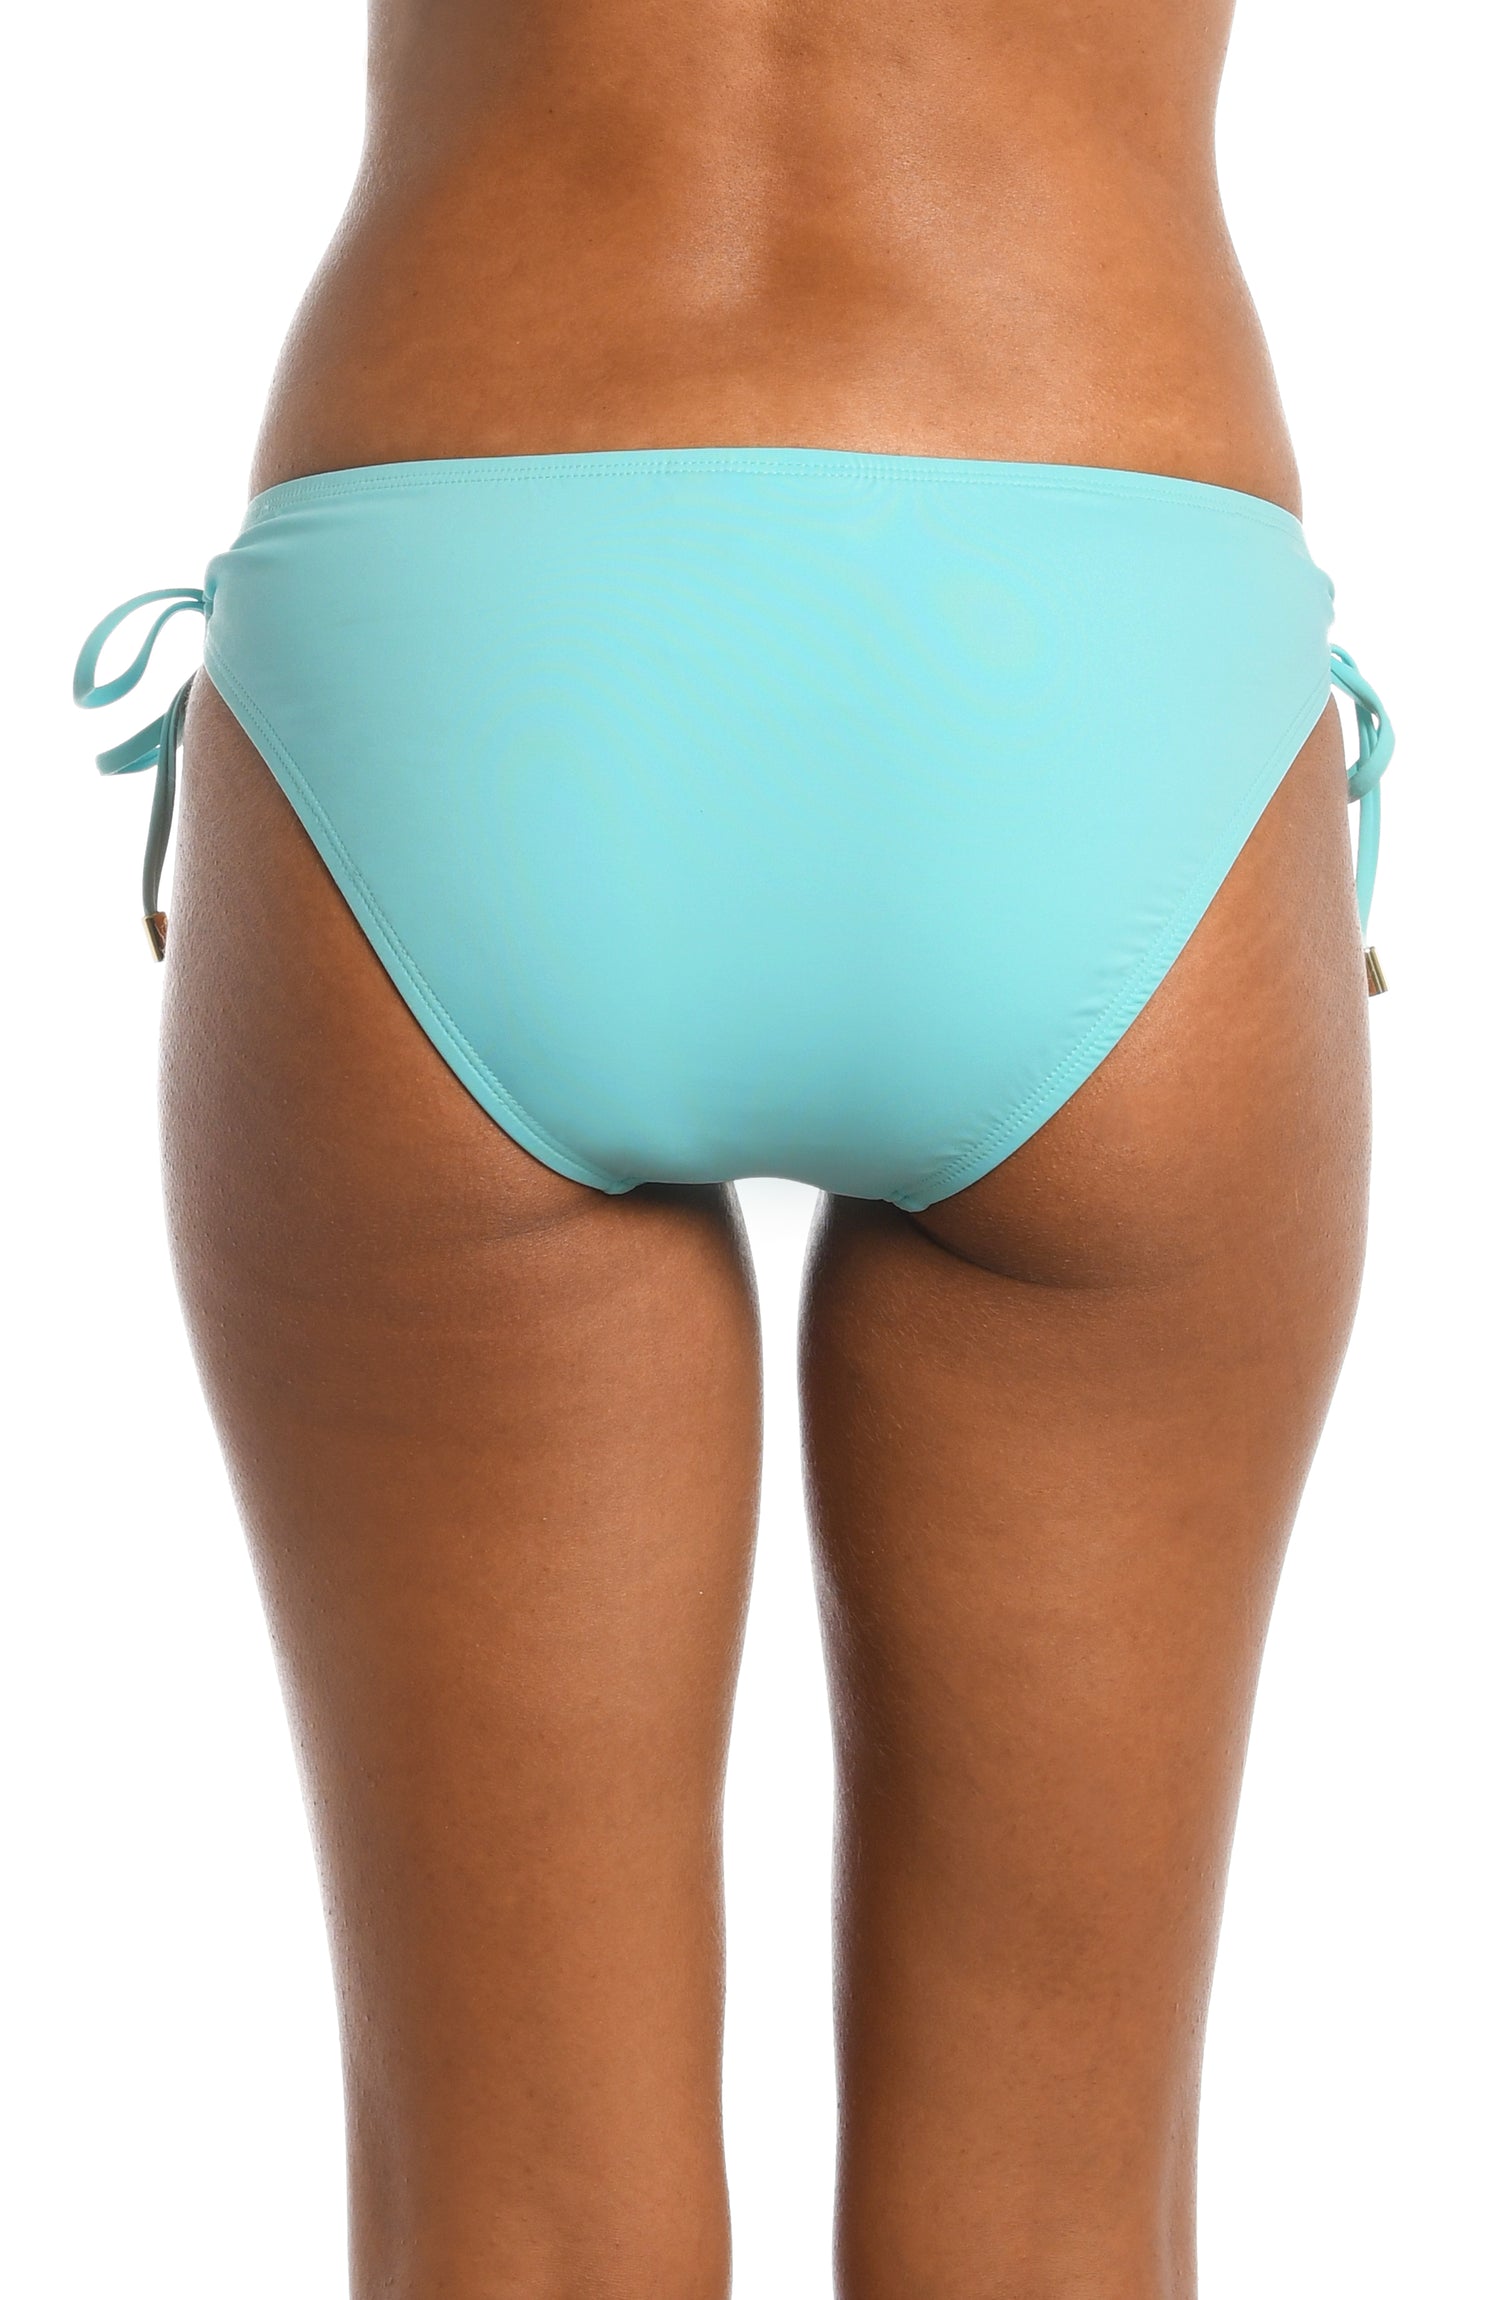 Model is wearing a ice blue colored side-tie swimsuit bottom from our Best-Selling Island Goddess collection.